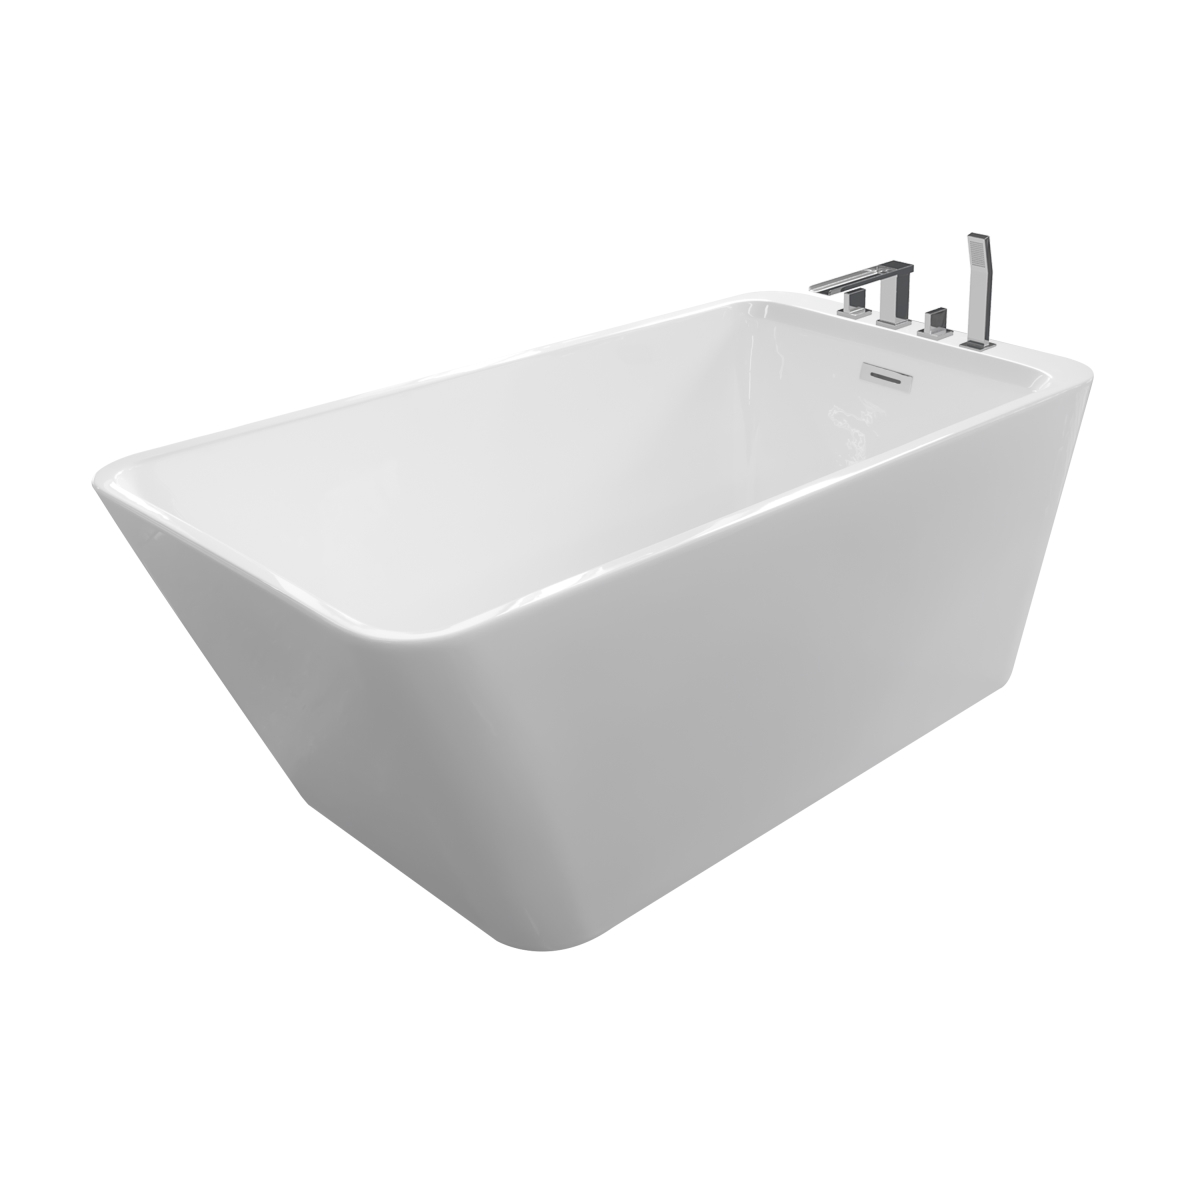 Justinian 55 Contemporary Rectangular Freestanding Acrylic Insulated Bath Tub With Faucet Deck, White - 55 X 29 X 23 In.